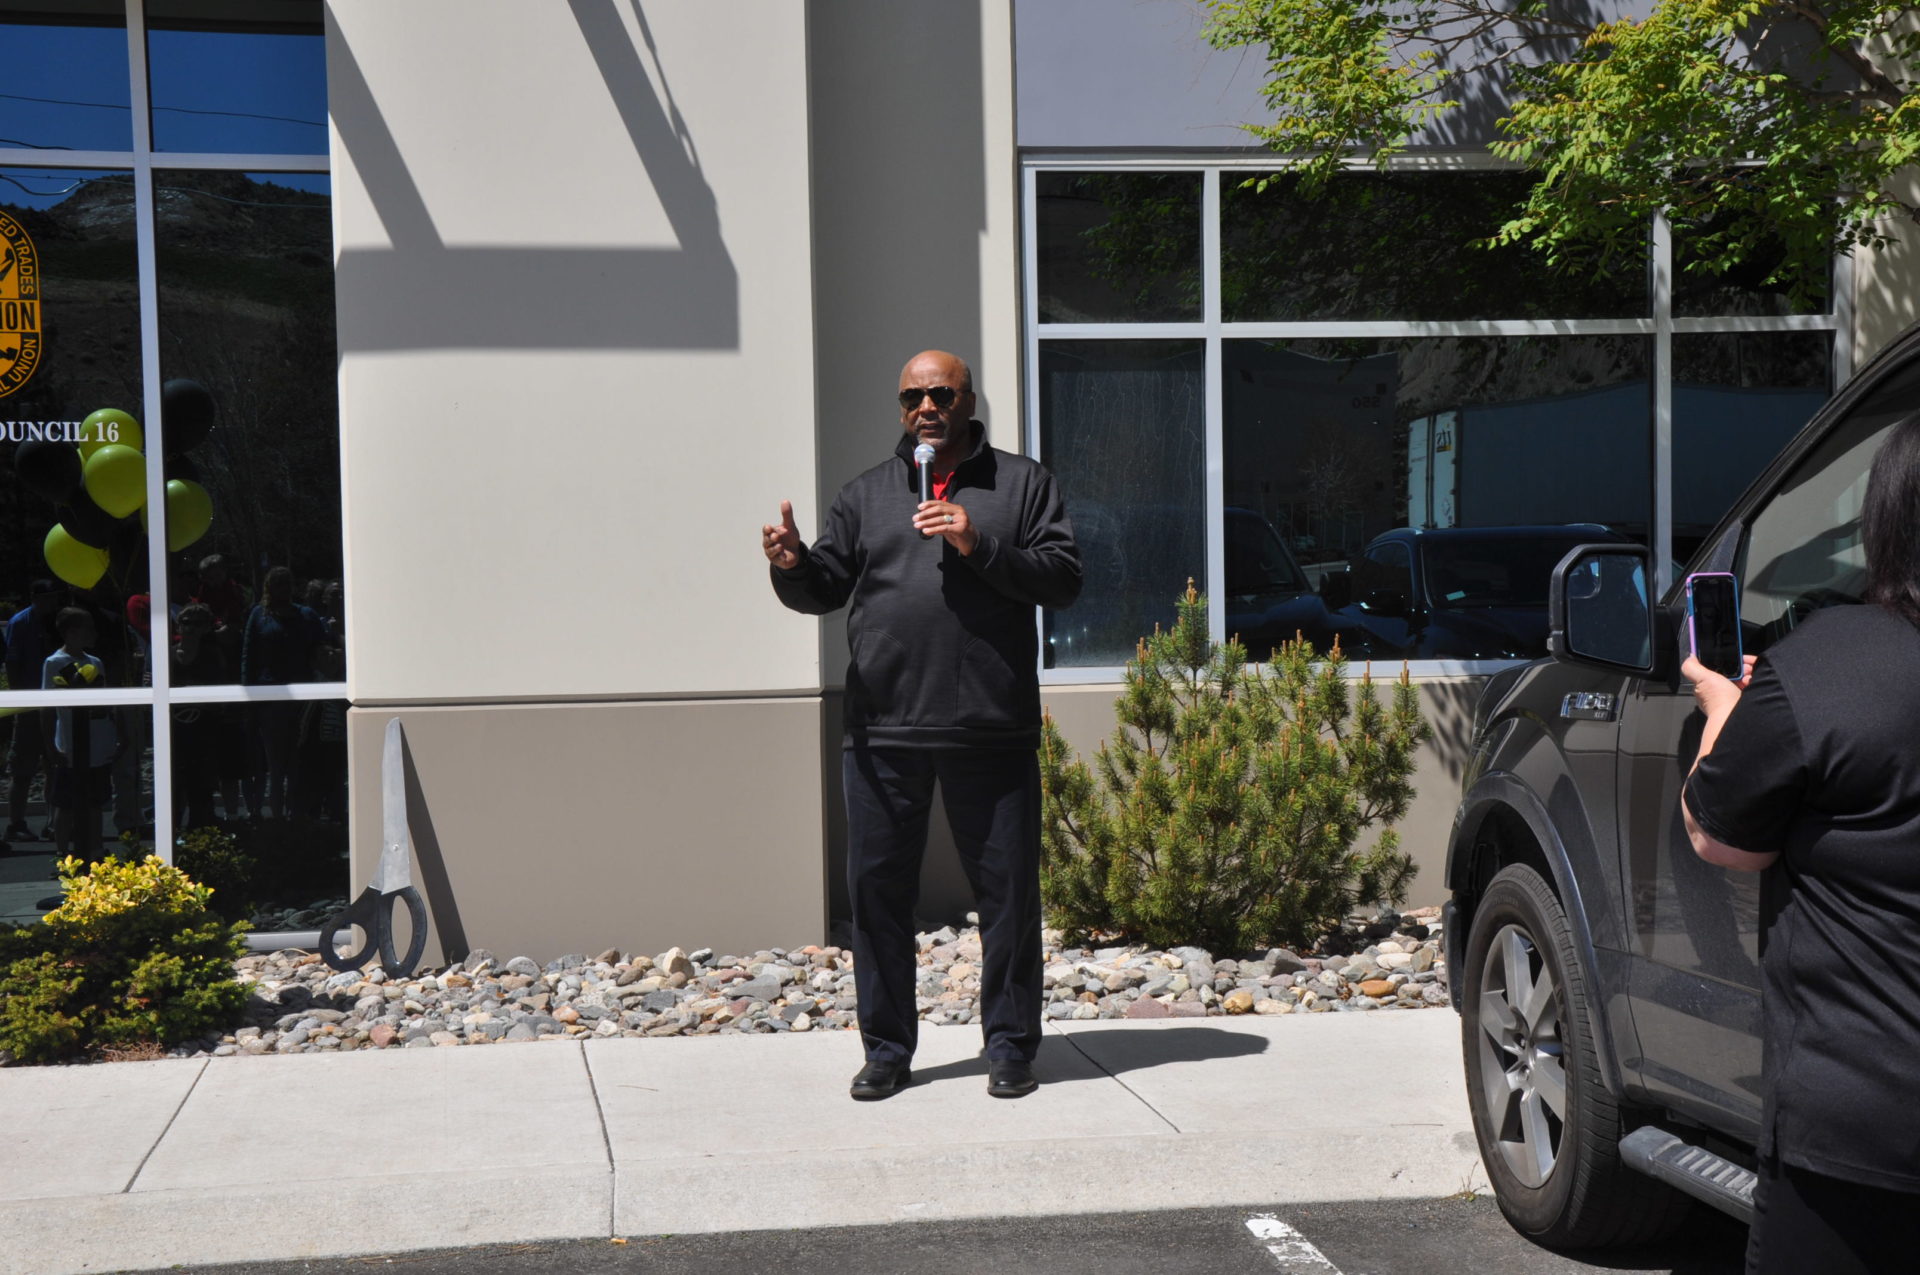 Image from the Gallery: Grand Opening of Apprenticeship Training Center – Sparks, NV